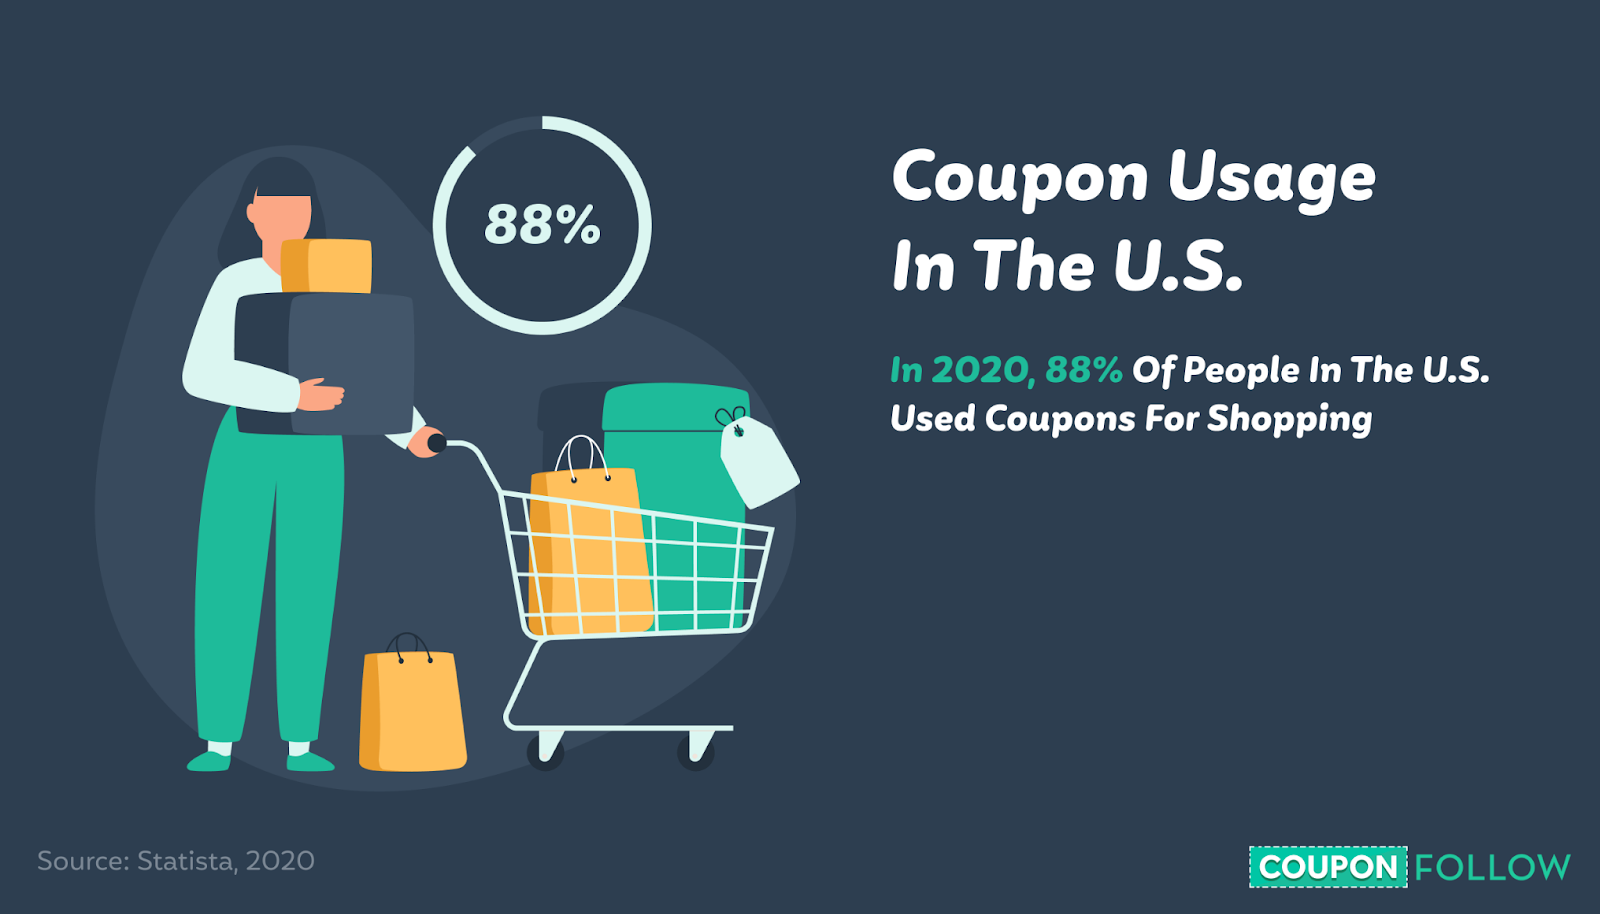 Illustration showing the percentage of US shoppers who use coupons